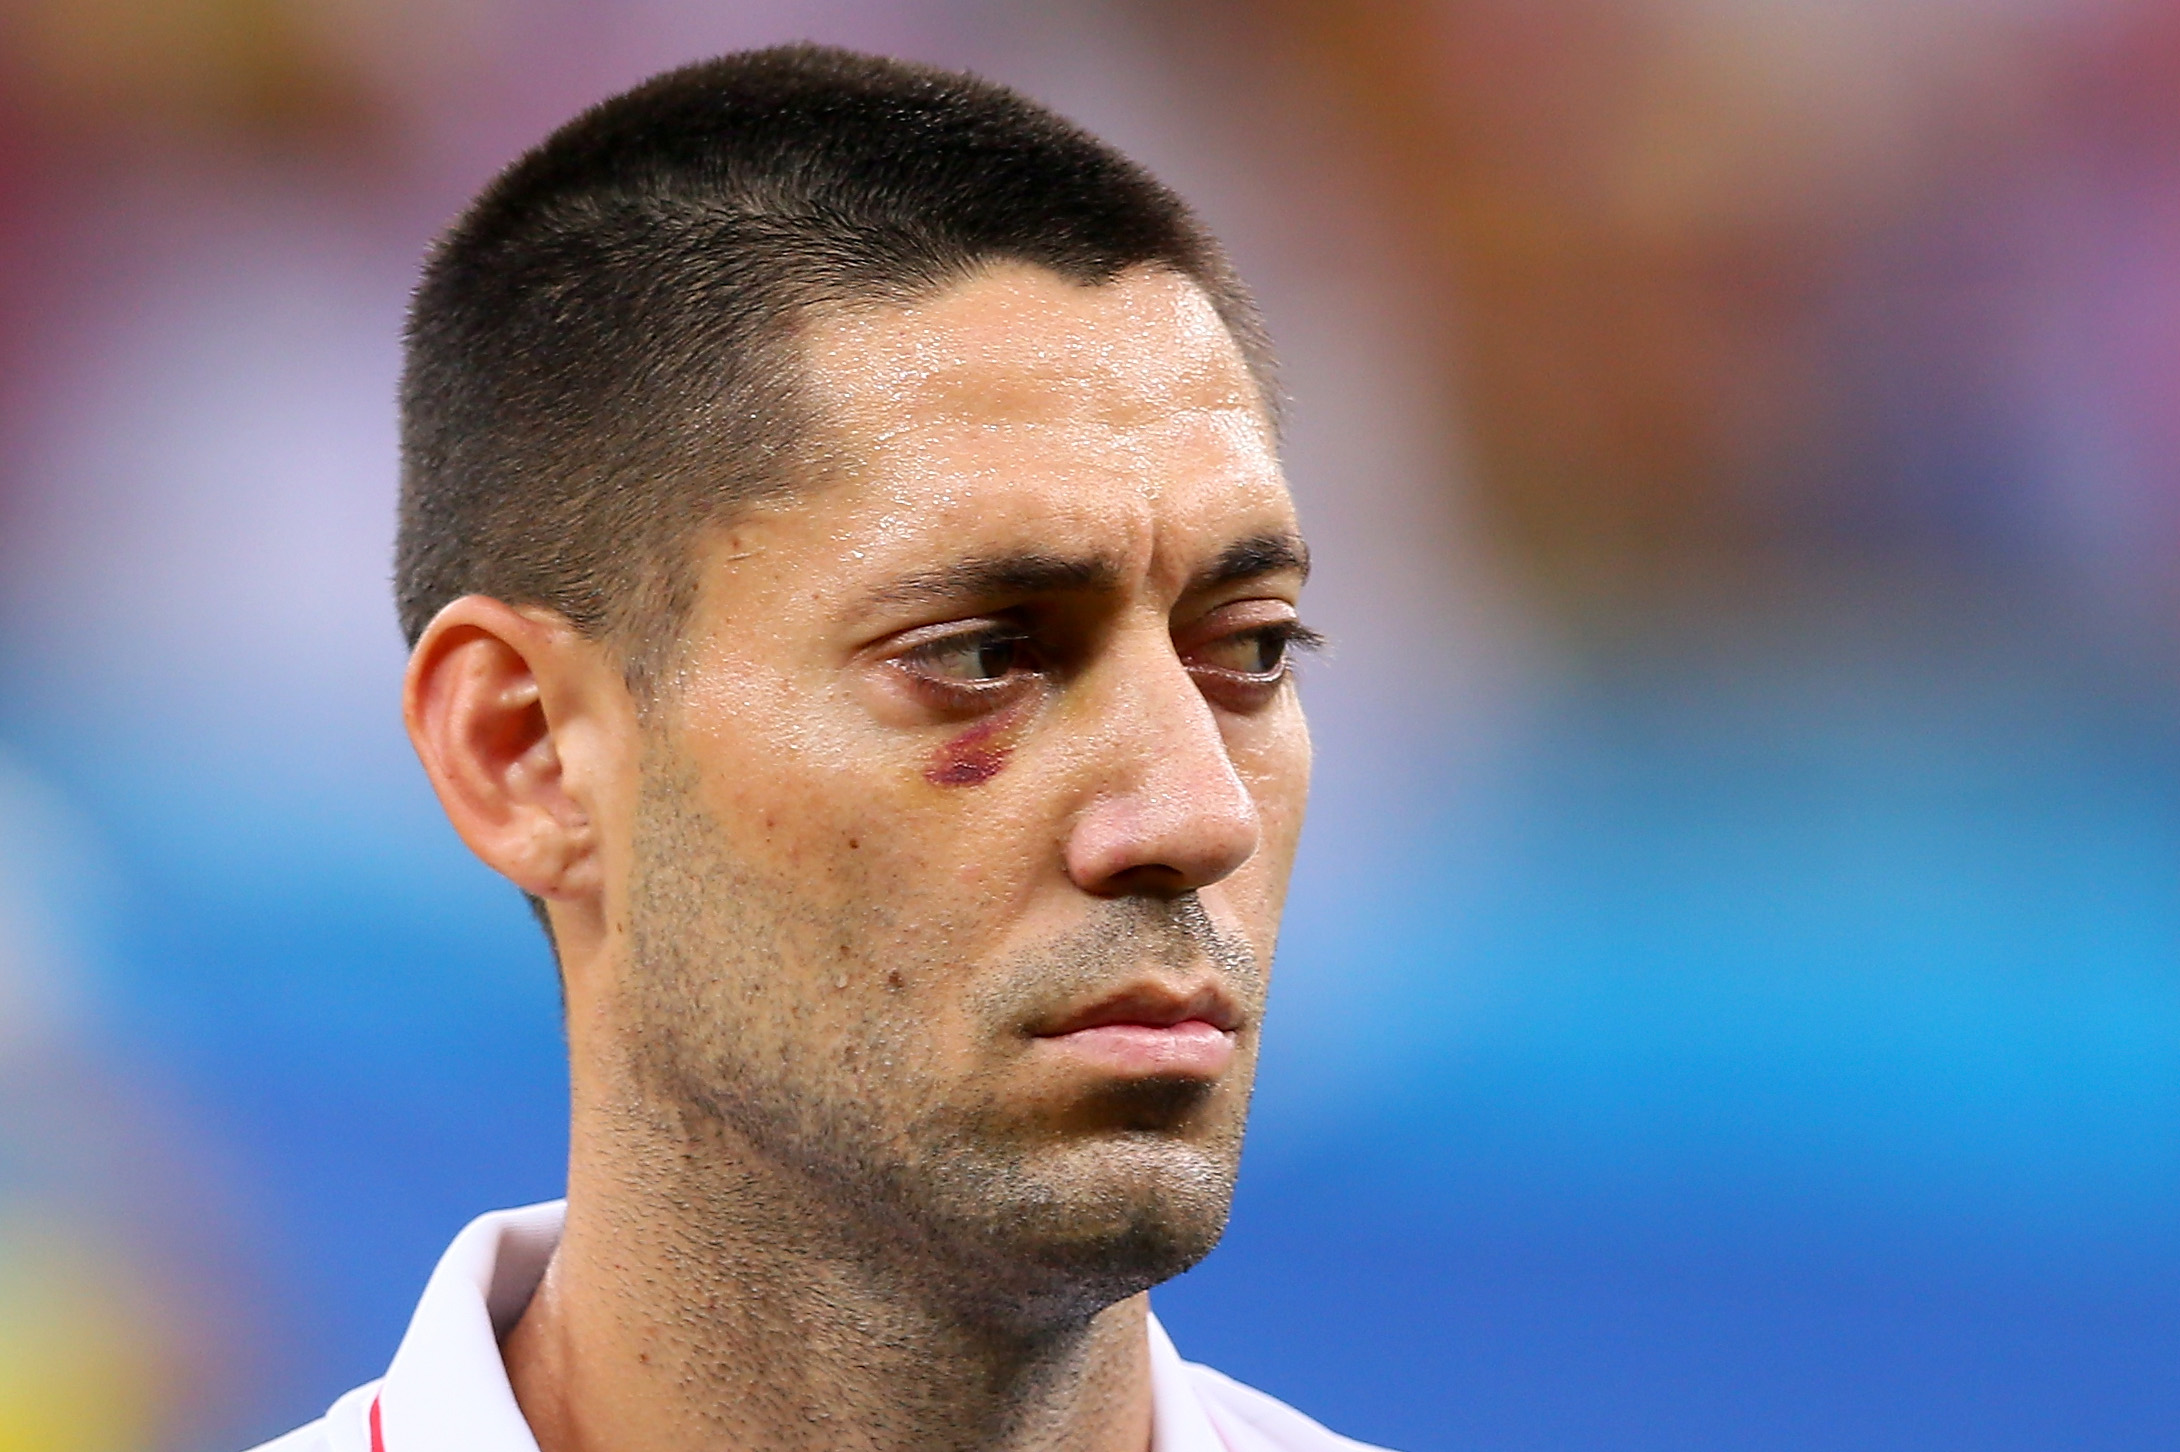 We're missing a No. 9”: Clint Dempsey analyzes USMNT before Hall of Fame  induction